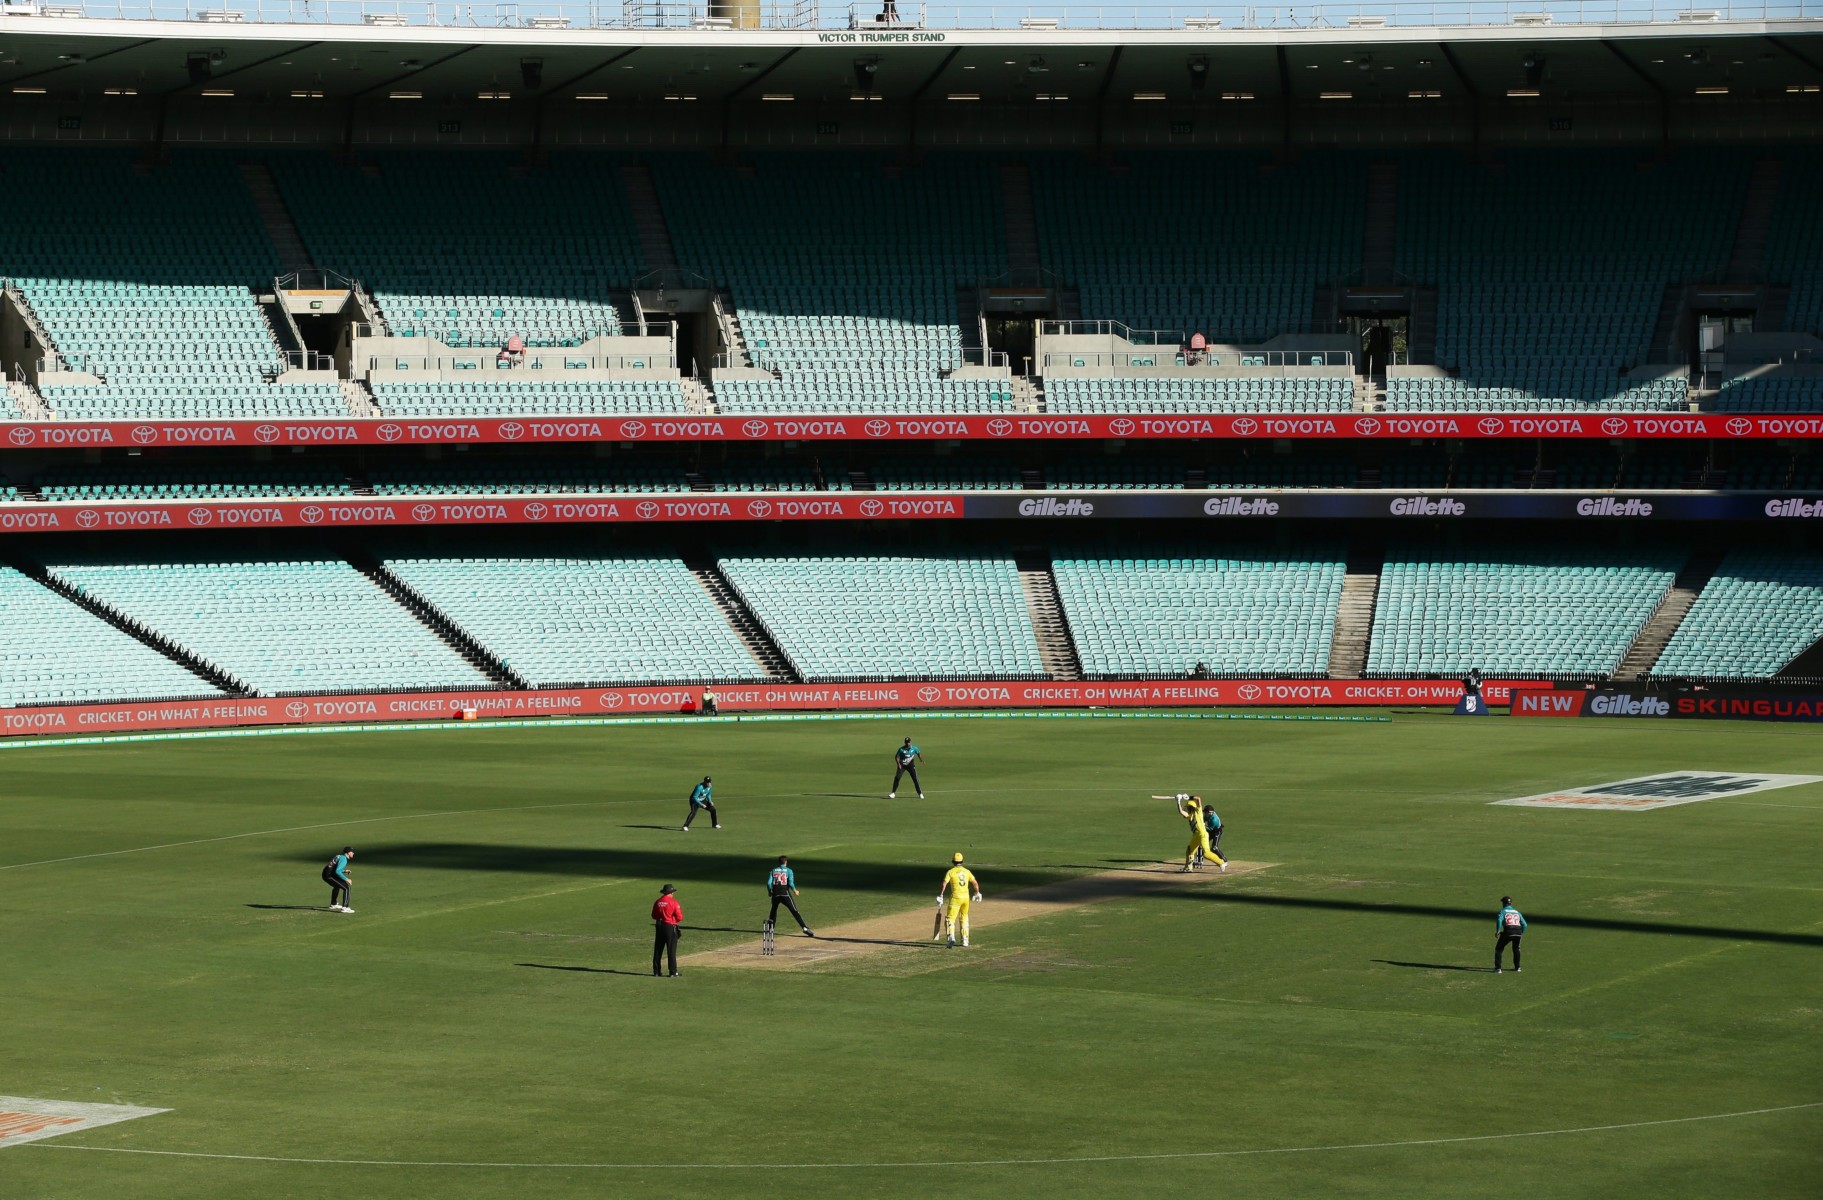 Australia beat New Zealand by 71 runs at the Sydney Cricket Ground but there were no fans in the stands to watch it